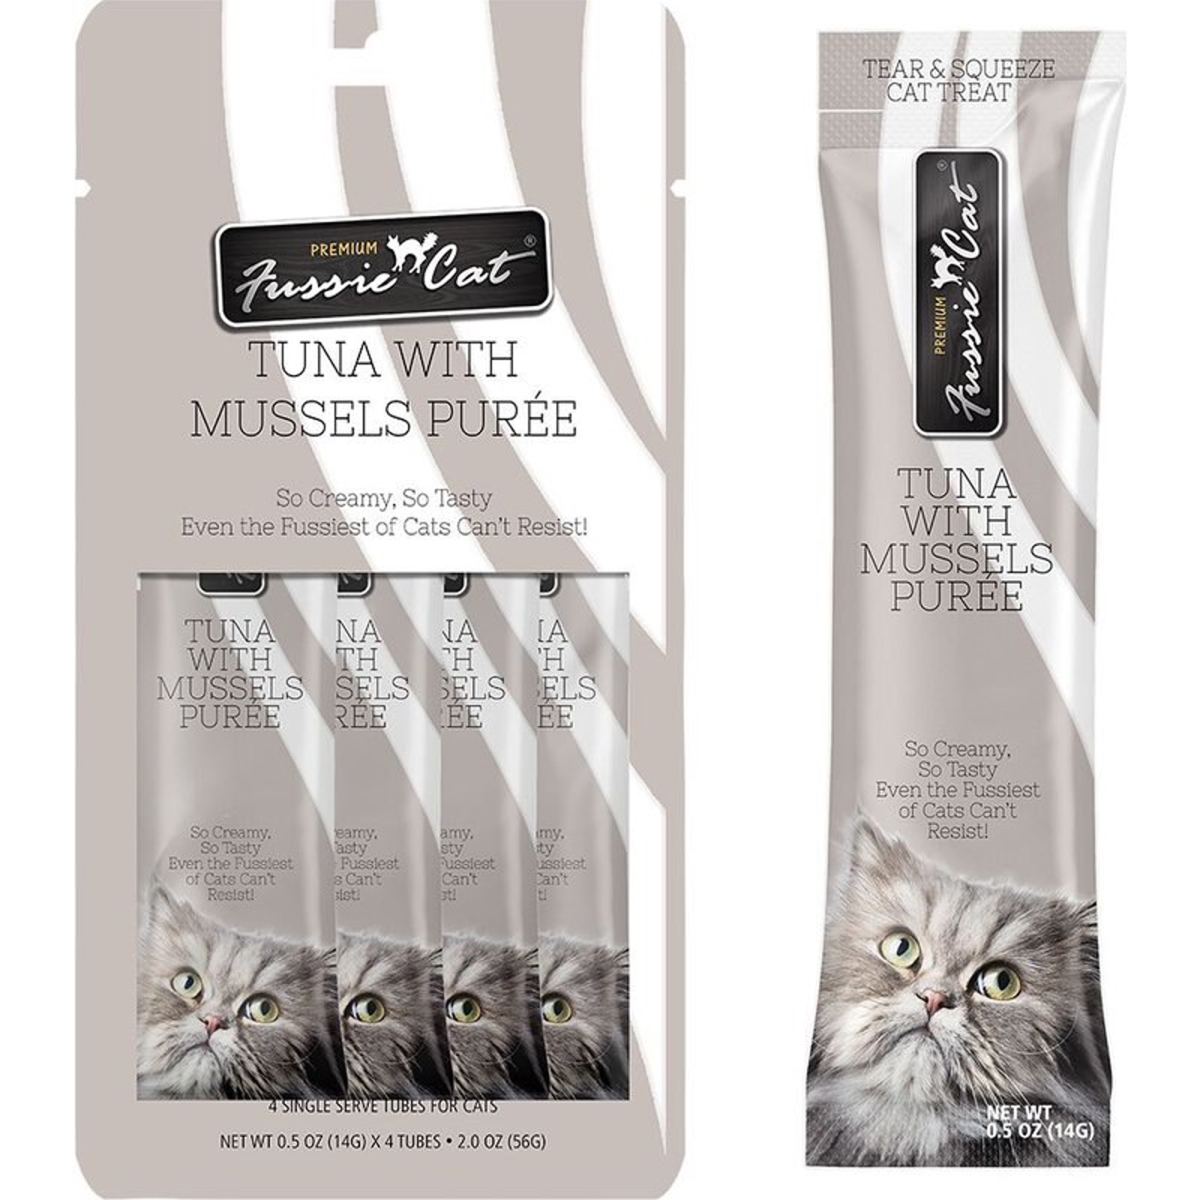 Picture of Fussie Cat 888641138982 2 oz Tuna Cat Treat with Mussels Puree - 18 Count